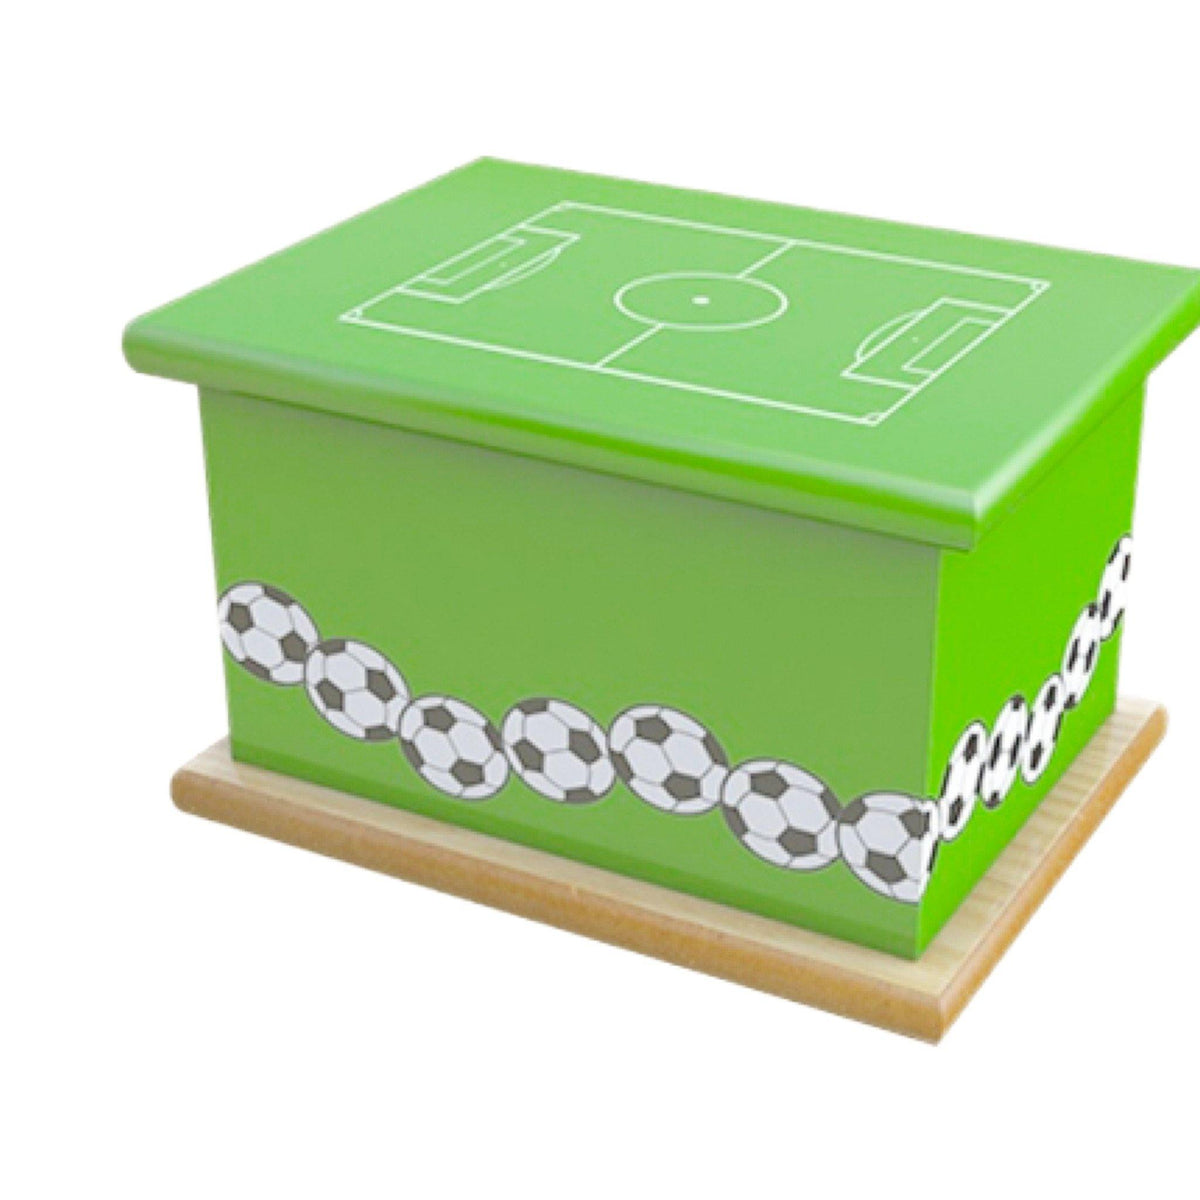 Wooden Urn Football Pitch Child COL